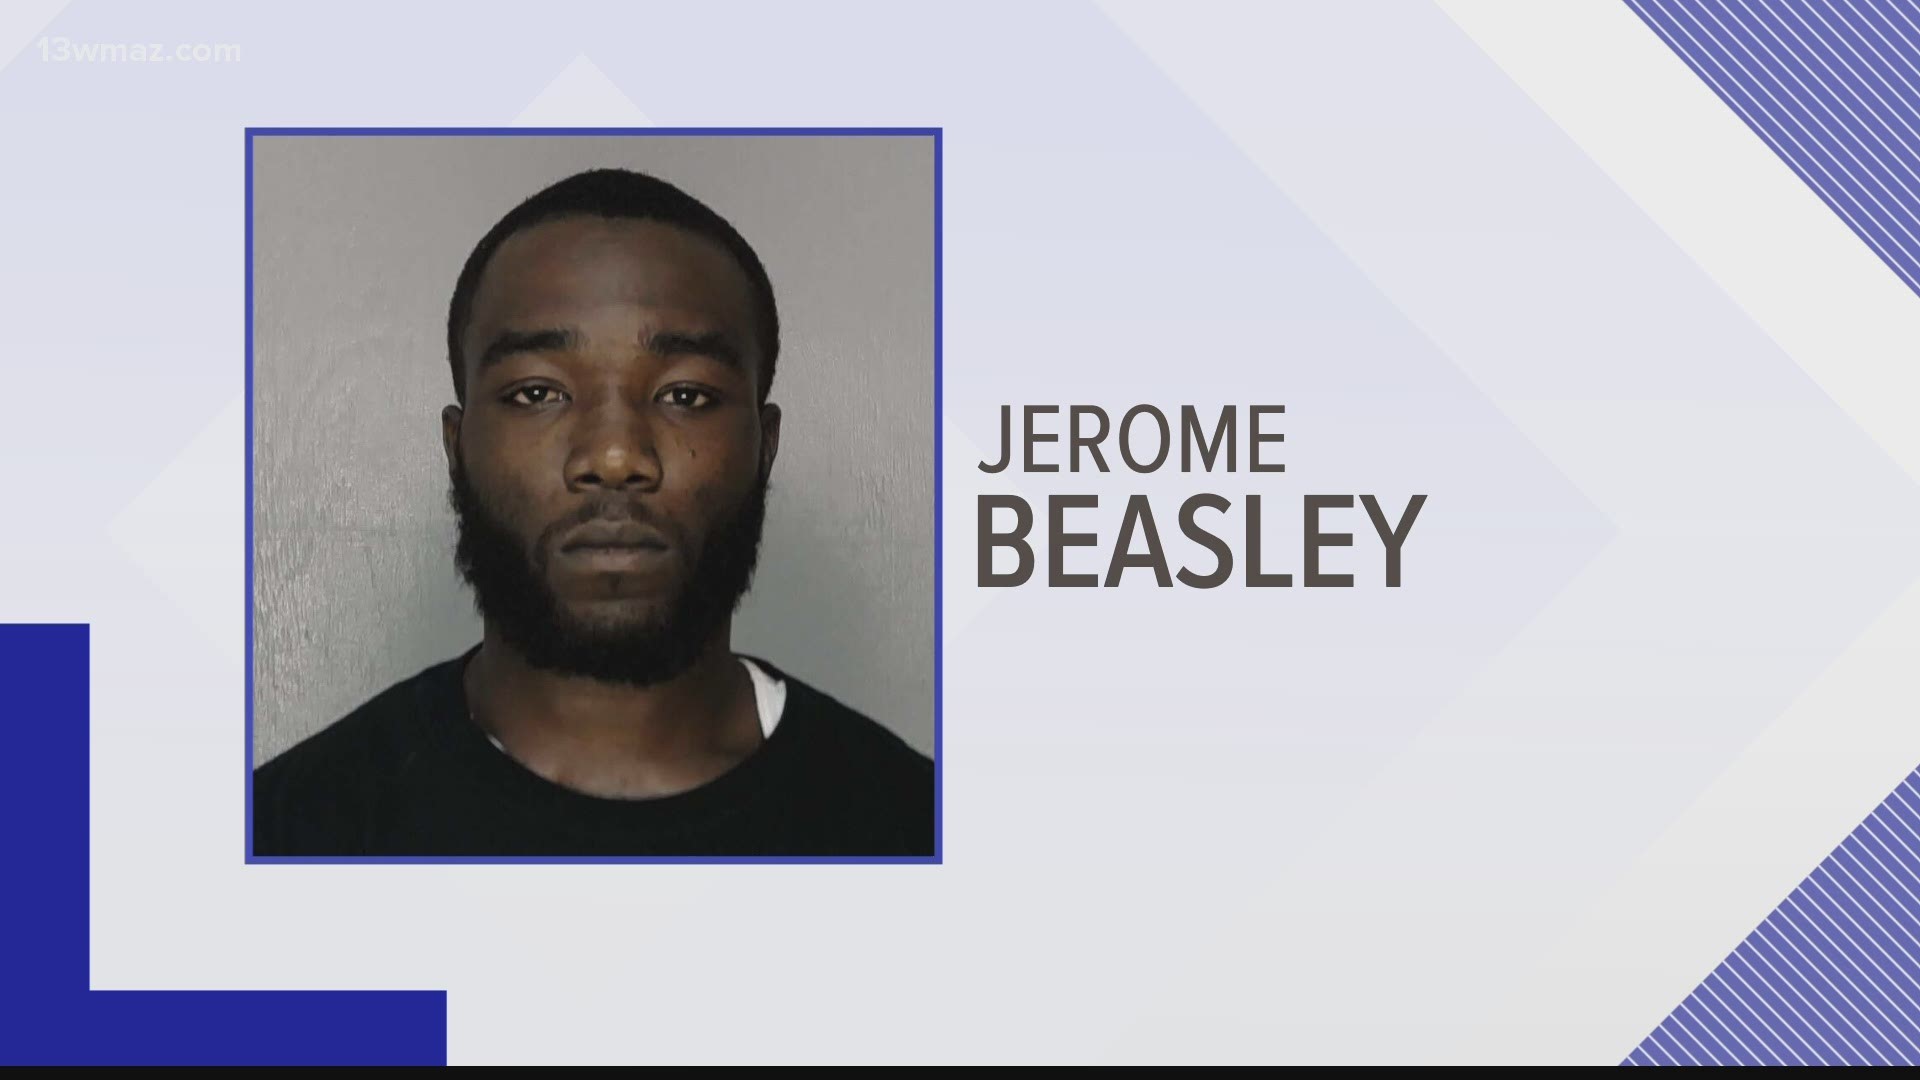 28-year-old Jerome Dewayne Beasley is charged with Murder and Concealing the Death of Another.